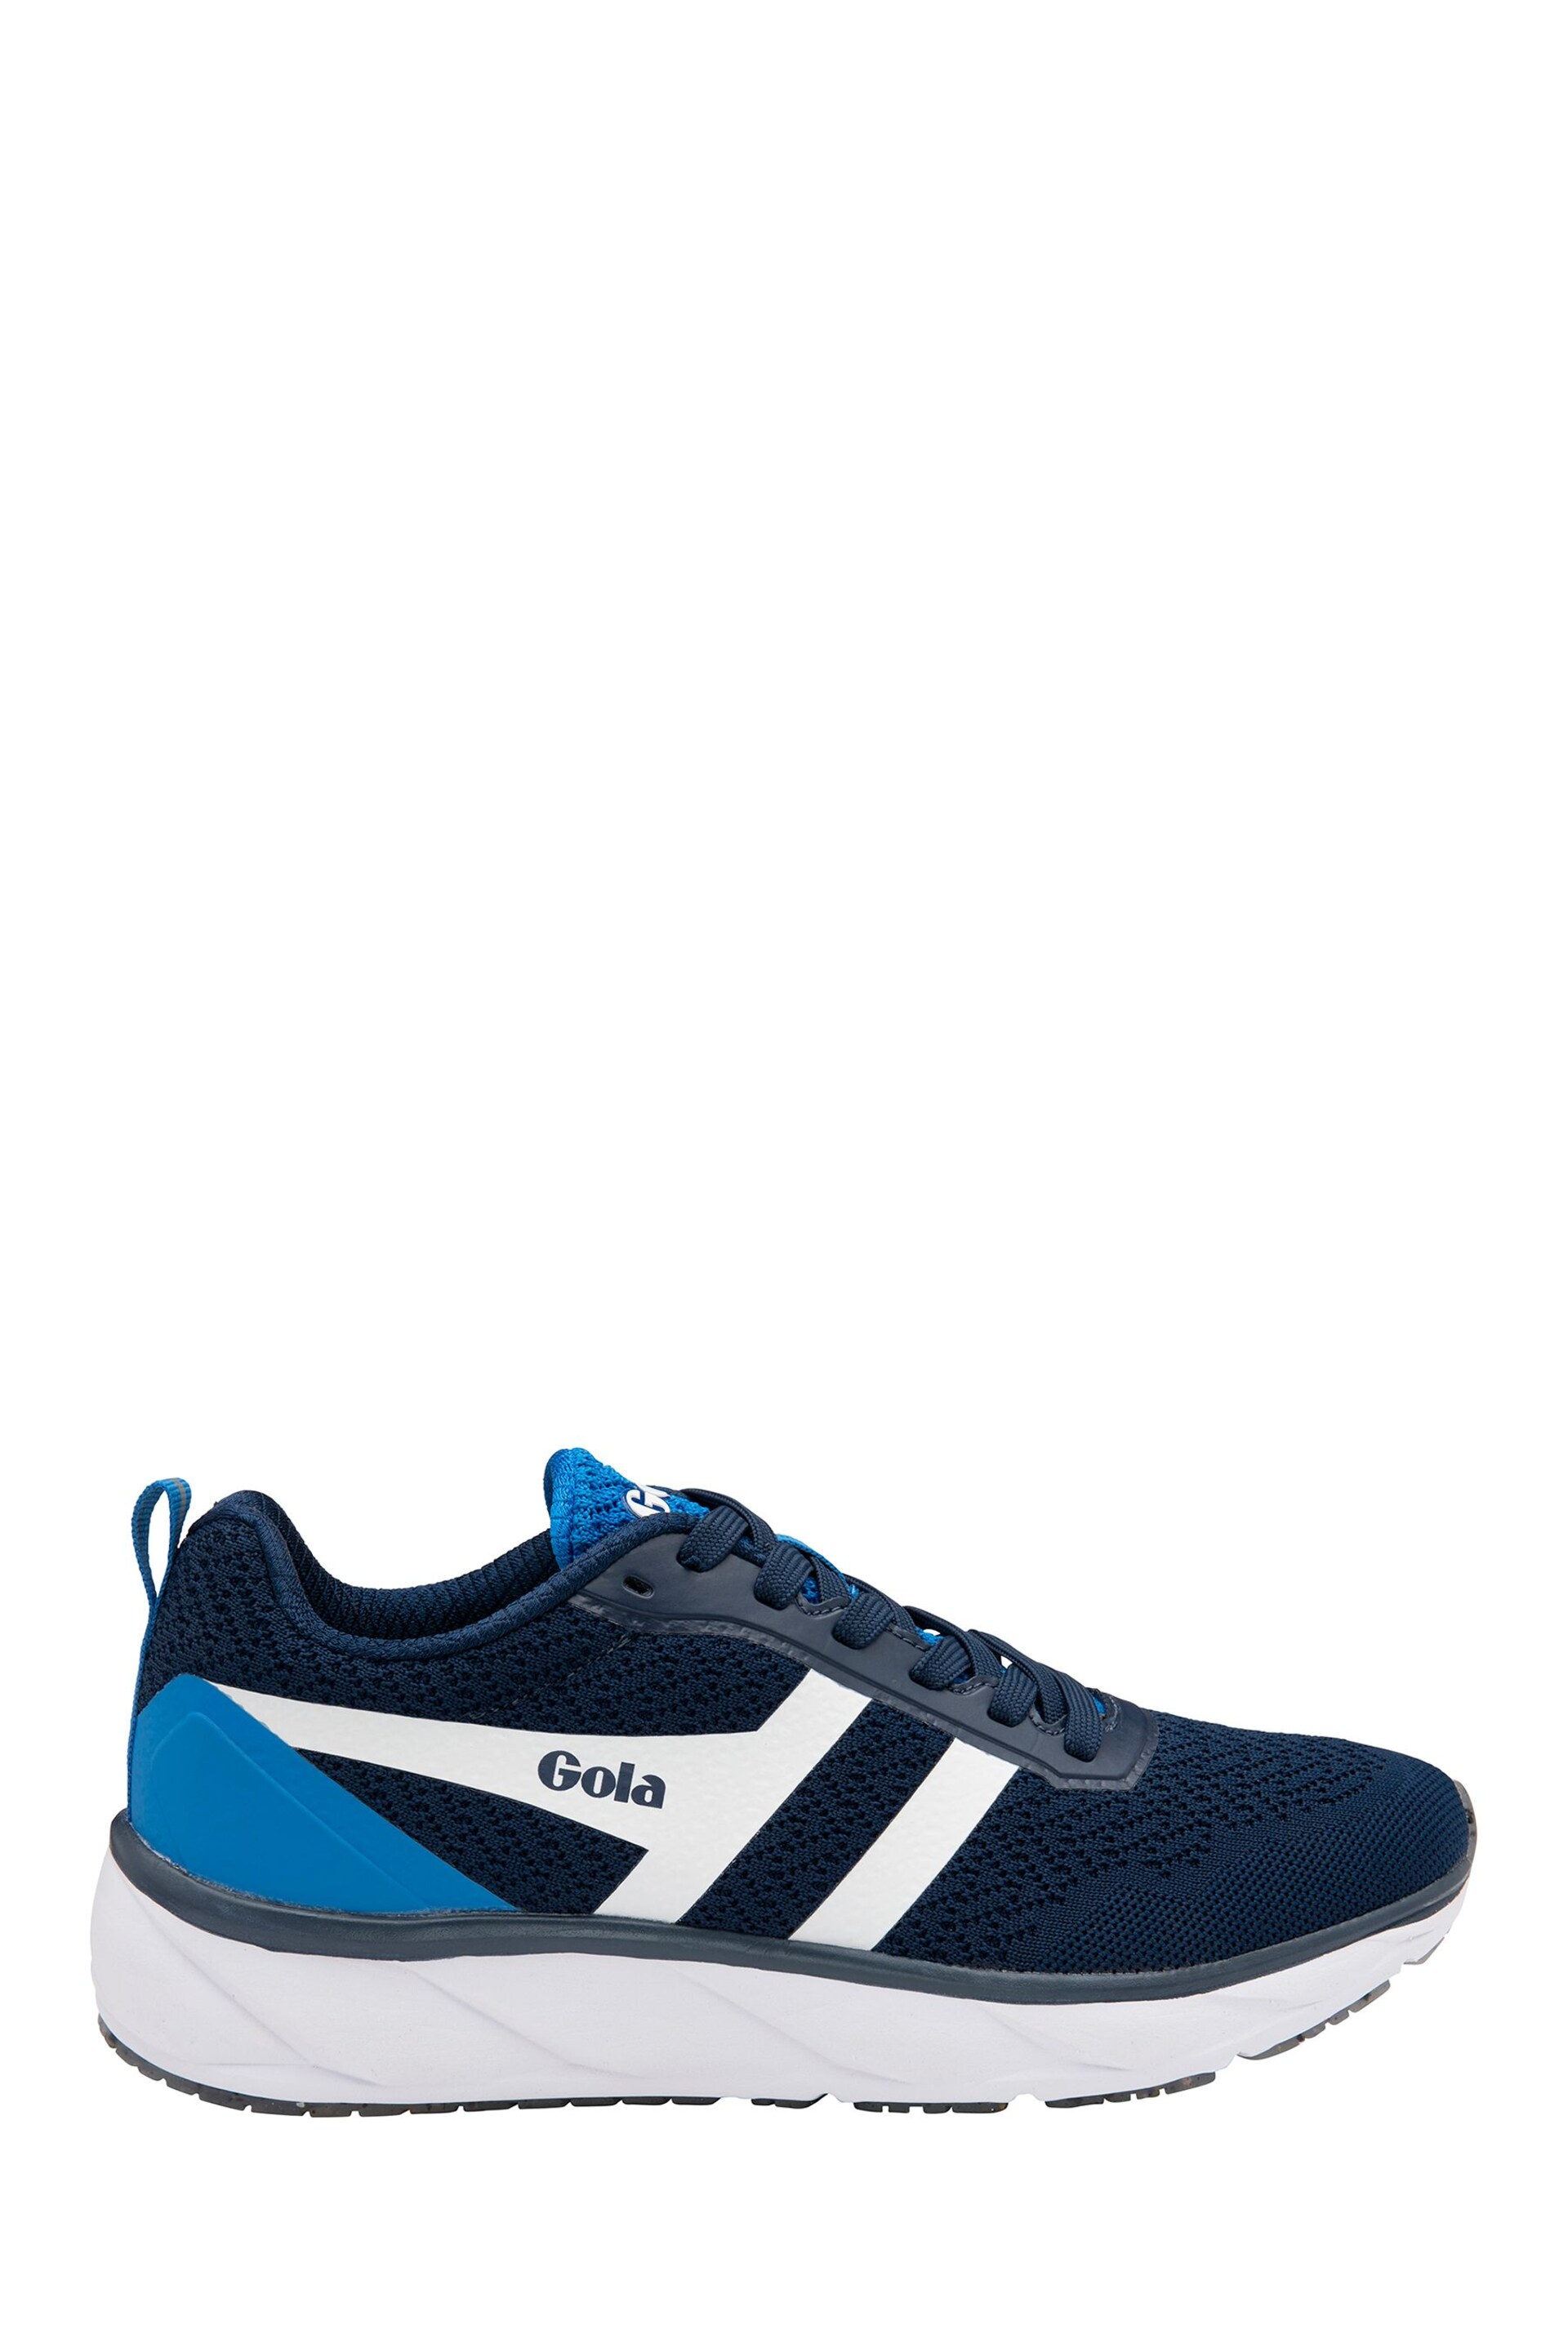 Gola Blue Typhoon RMD Mesh Lace-Up Mens Running Trainers - Image 1 of 4